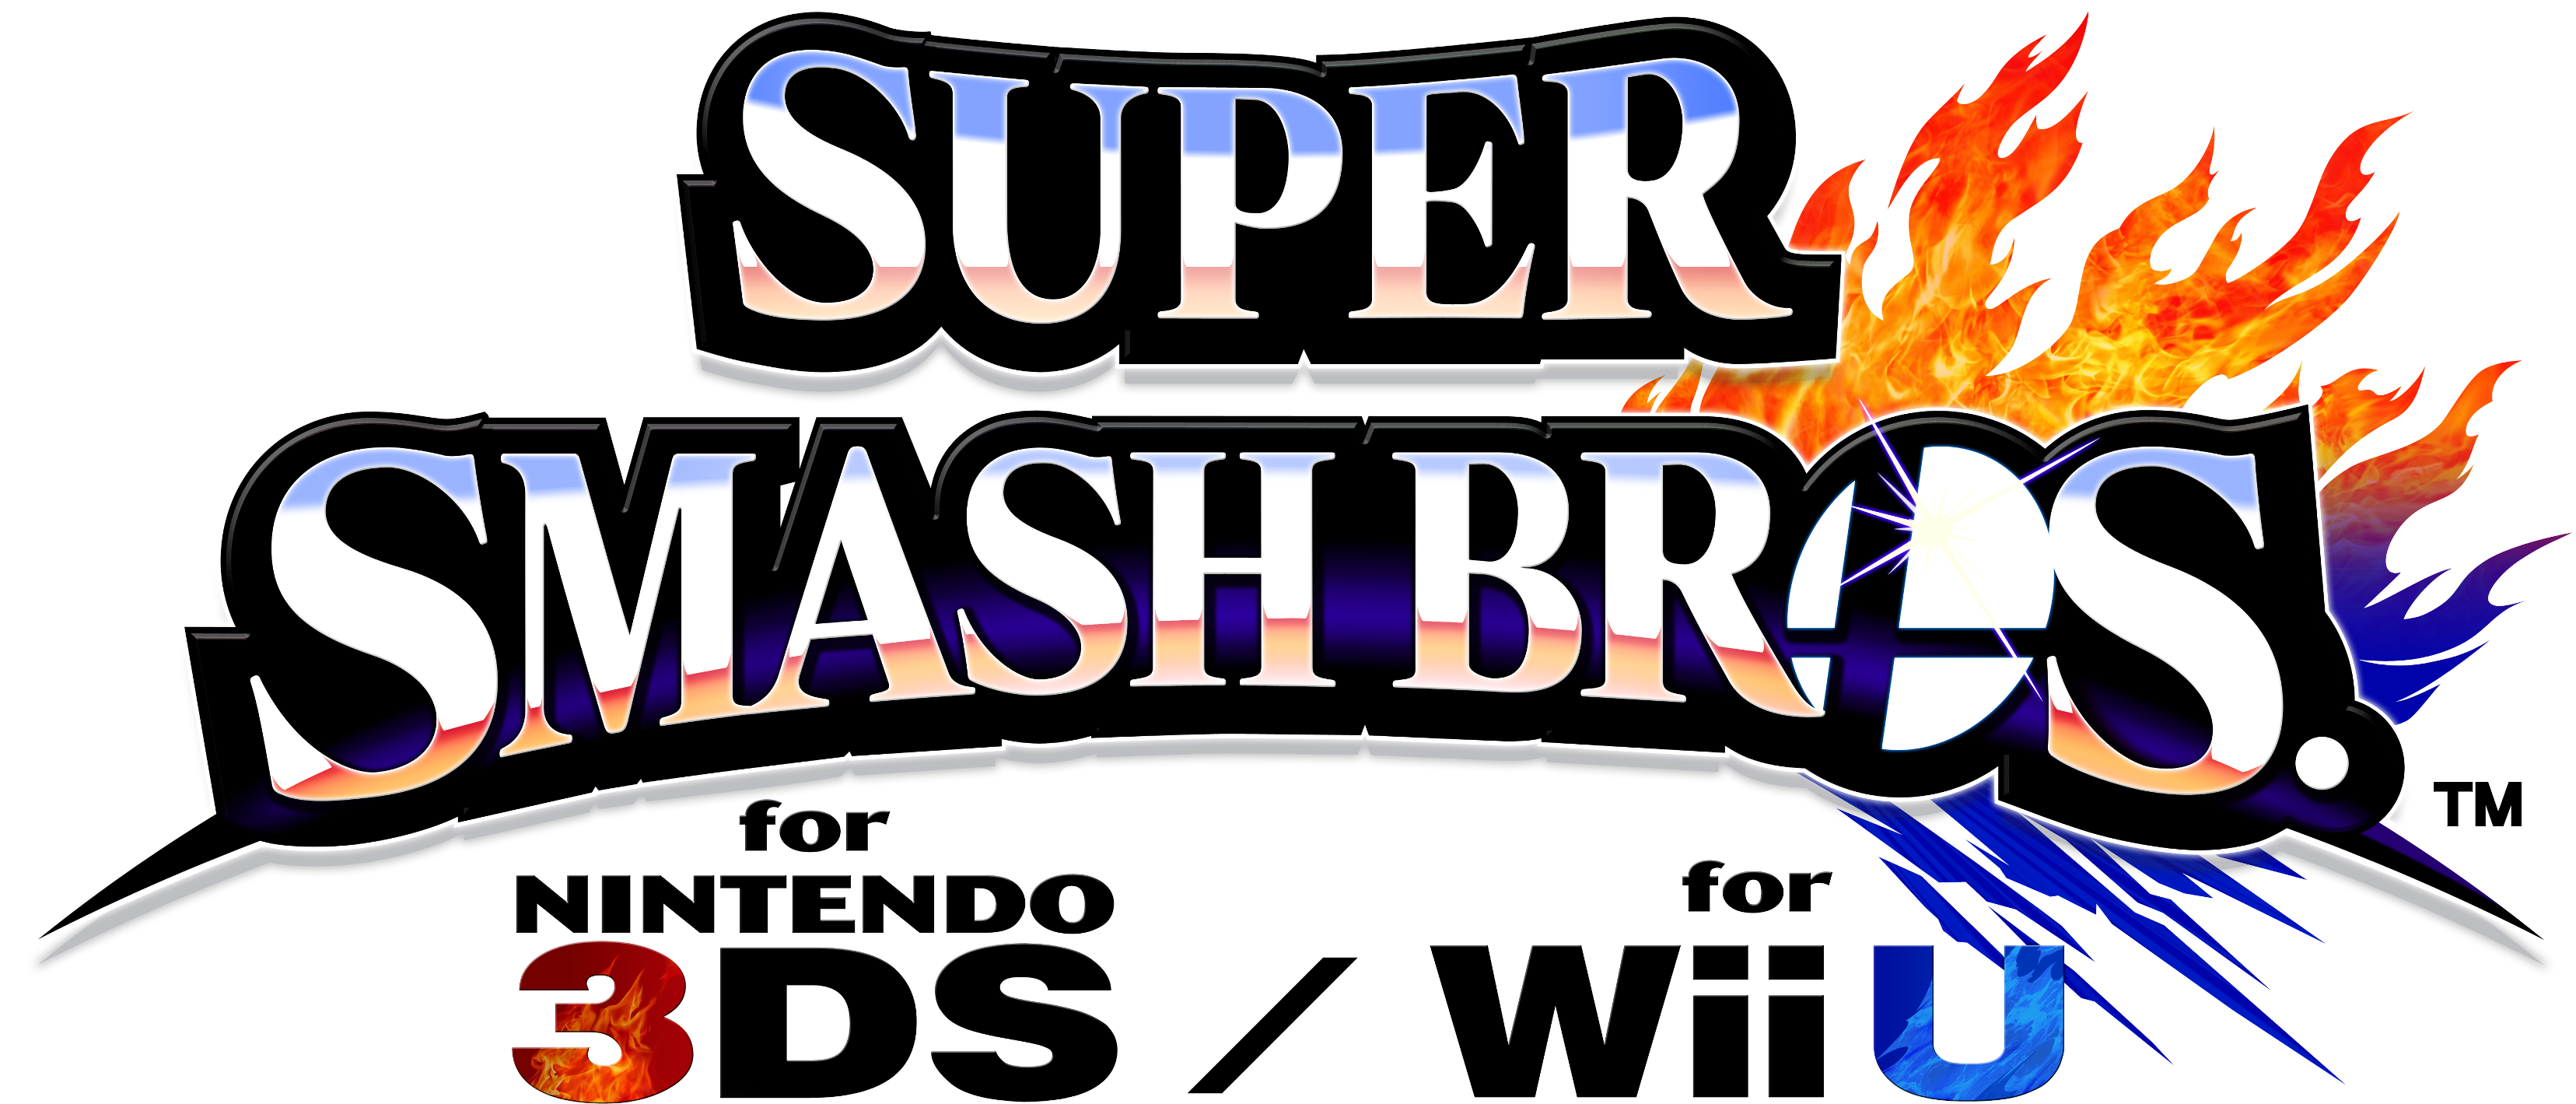 High Resolution Wallpaper | Super Smash Bros. For Nintendo 3DS And Wii U 3312x1419 px